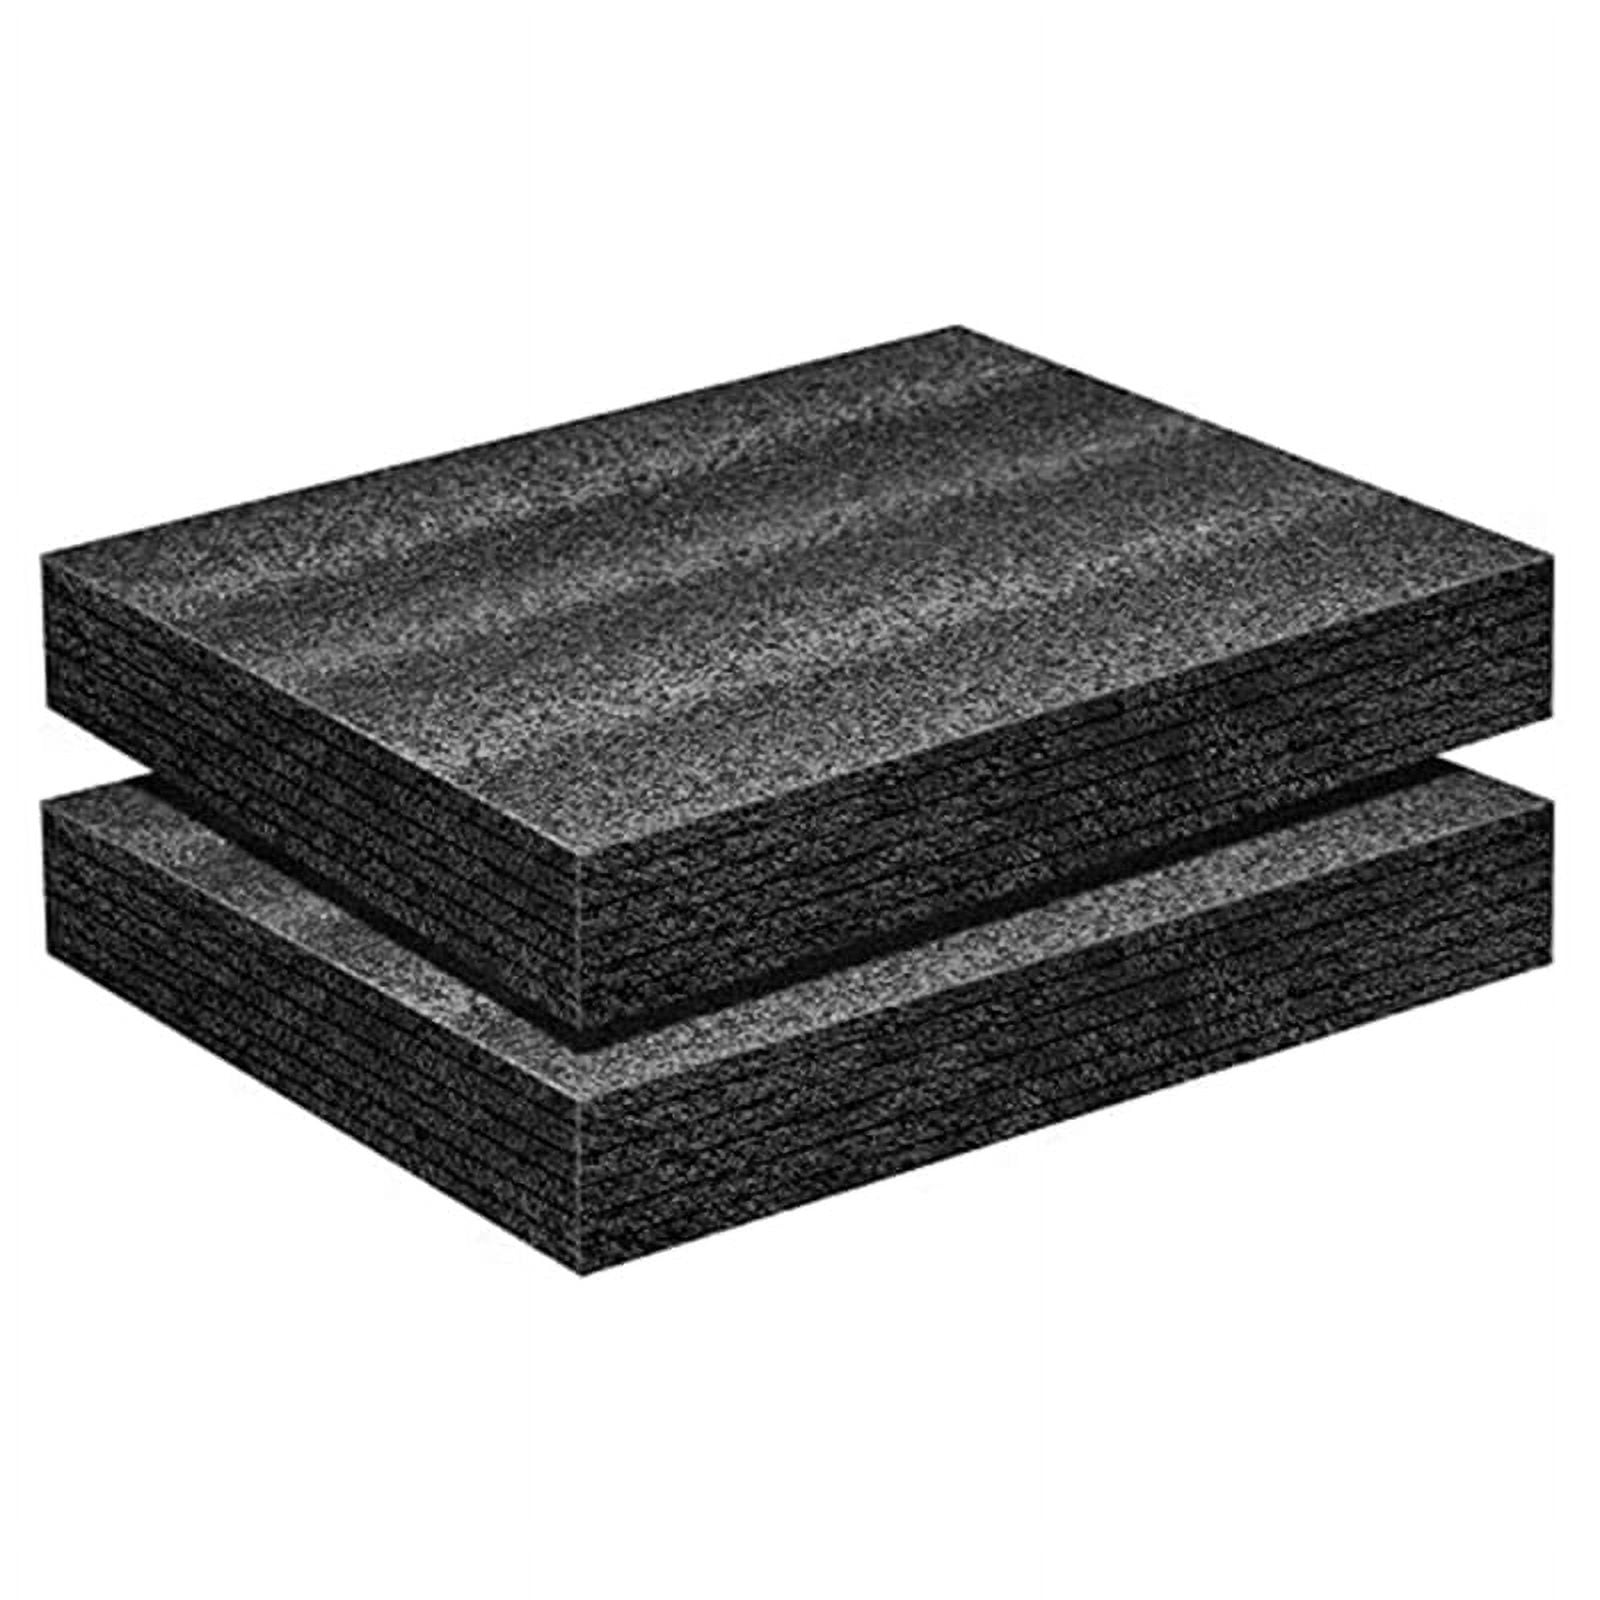 3 Pcs Cuttable Polyurethane Foam Pads, 16 x 12 x 2 Inches Packing Foam  Sheets Black Foam Inserts for Cases Foam Padding 2 Inch Thick for Toolbox